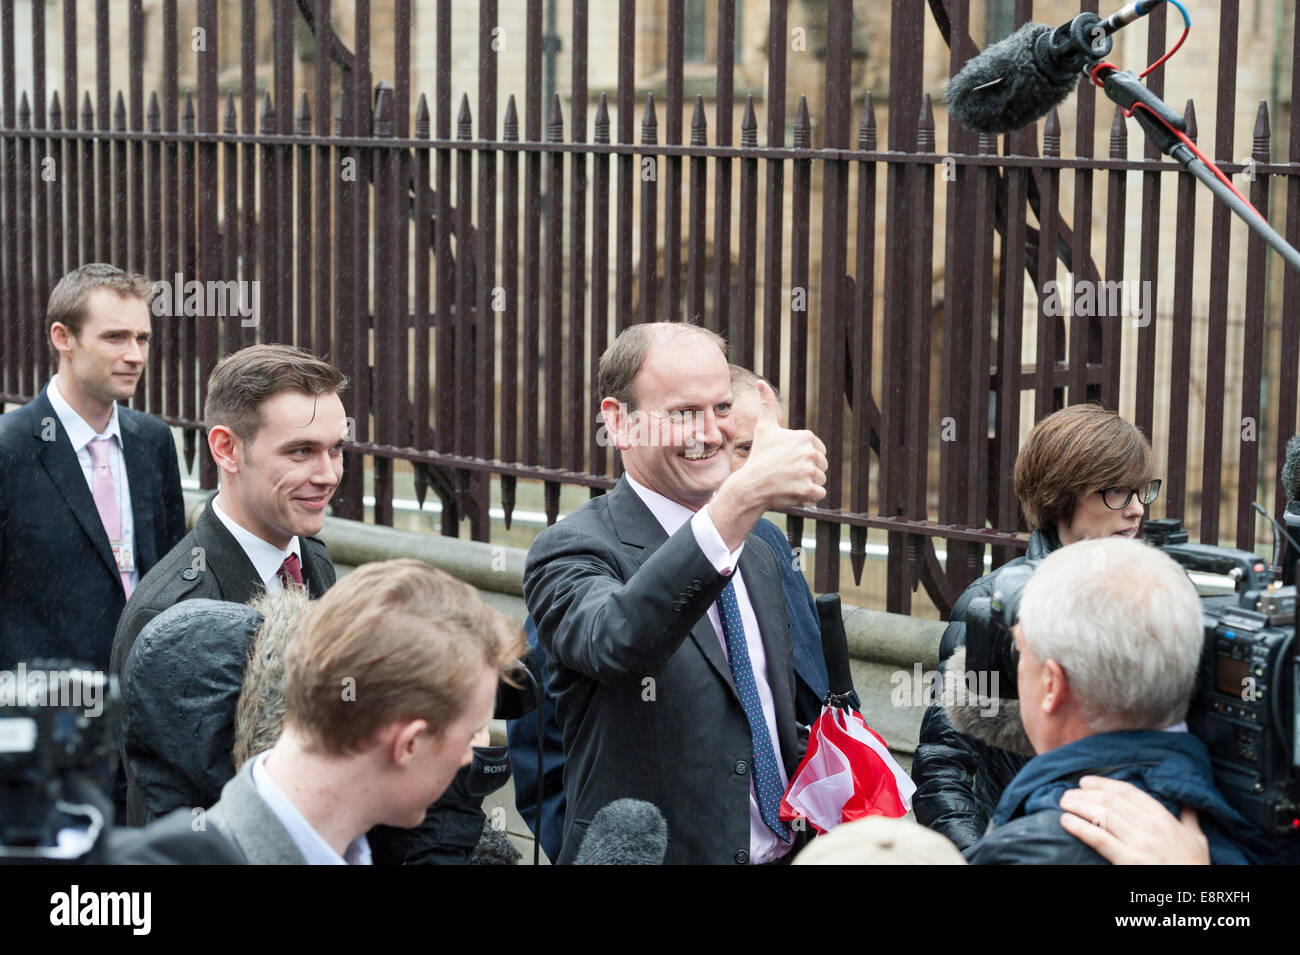 Parliament Square, London, UK. 13th October 2014. Ukip MP Douglas Carswell arrives at the Houses of Parliament. Stock Photo